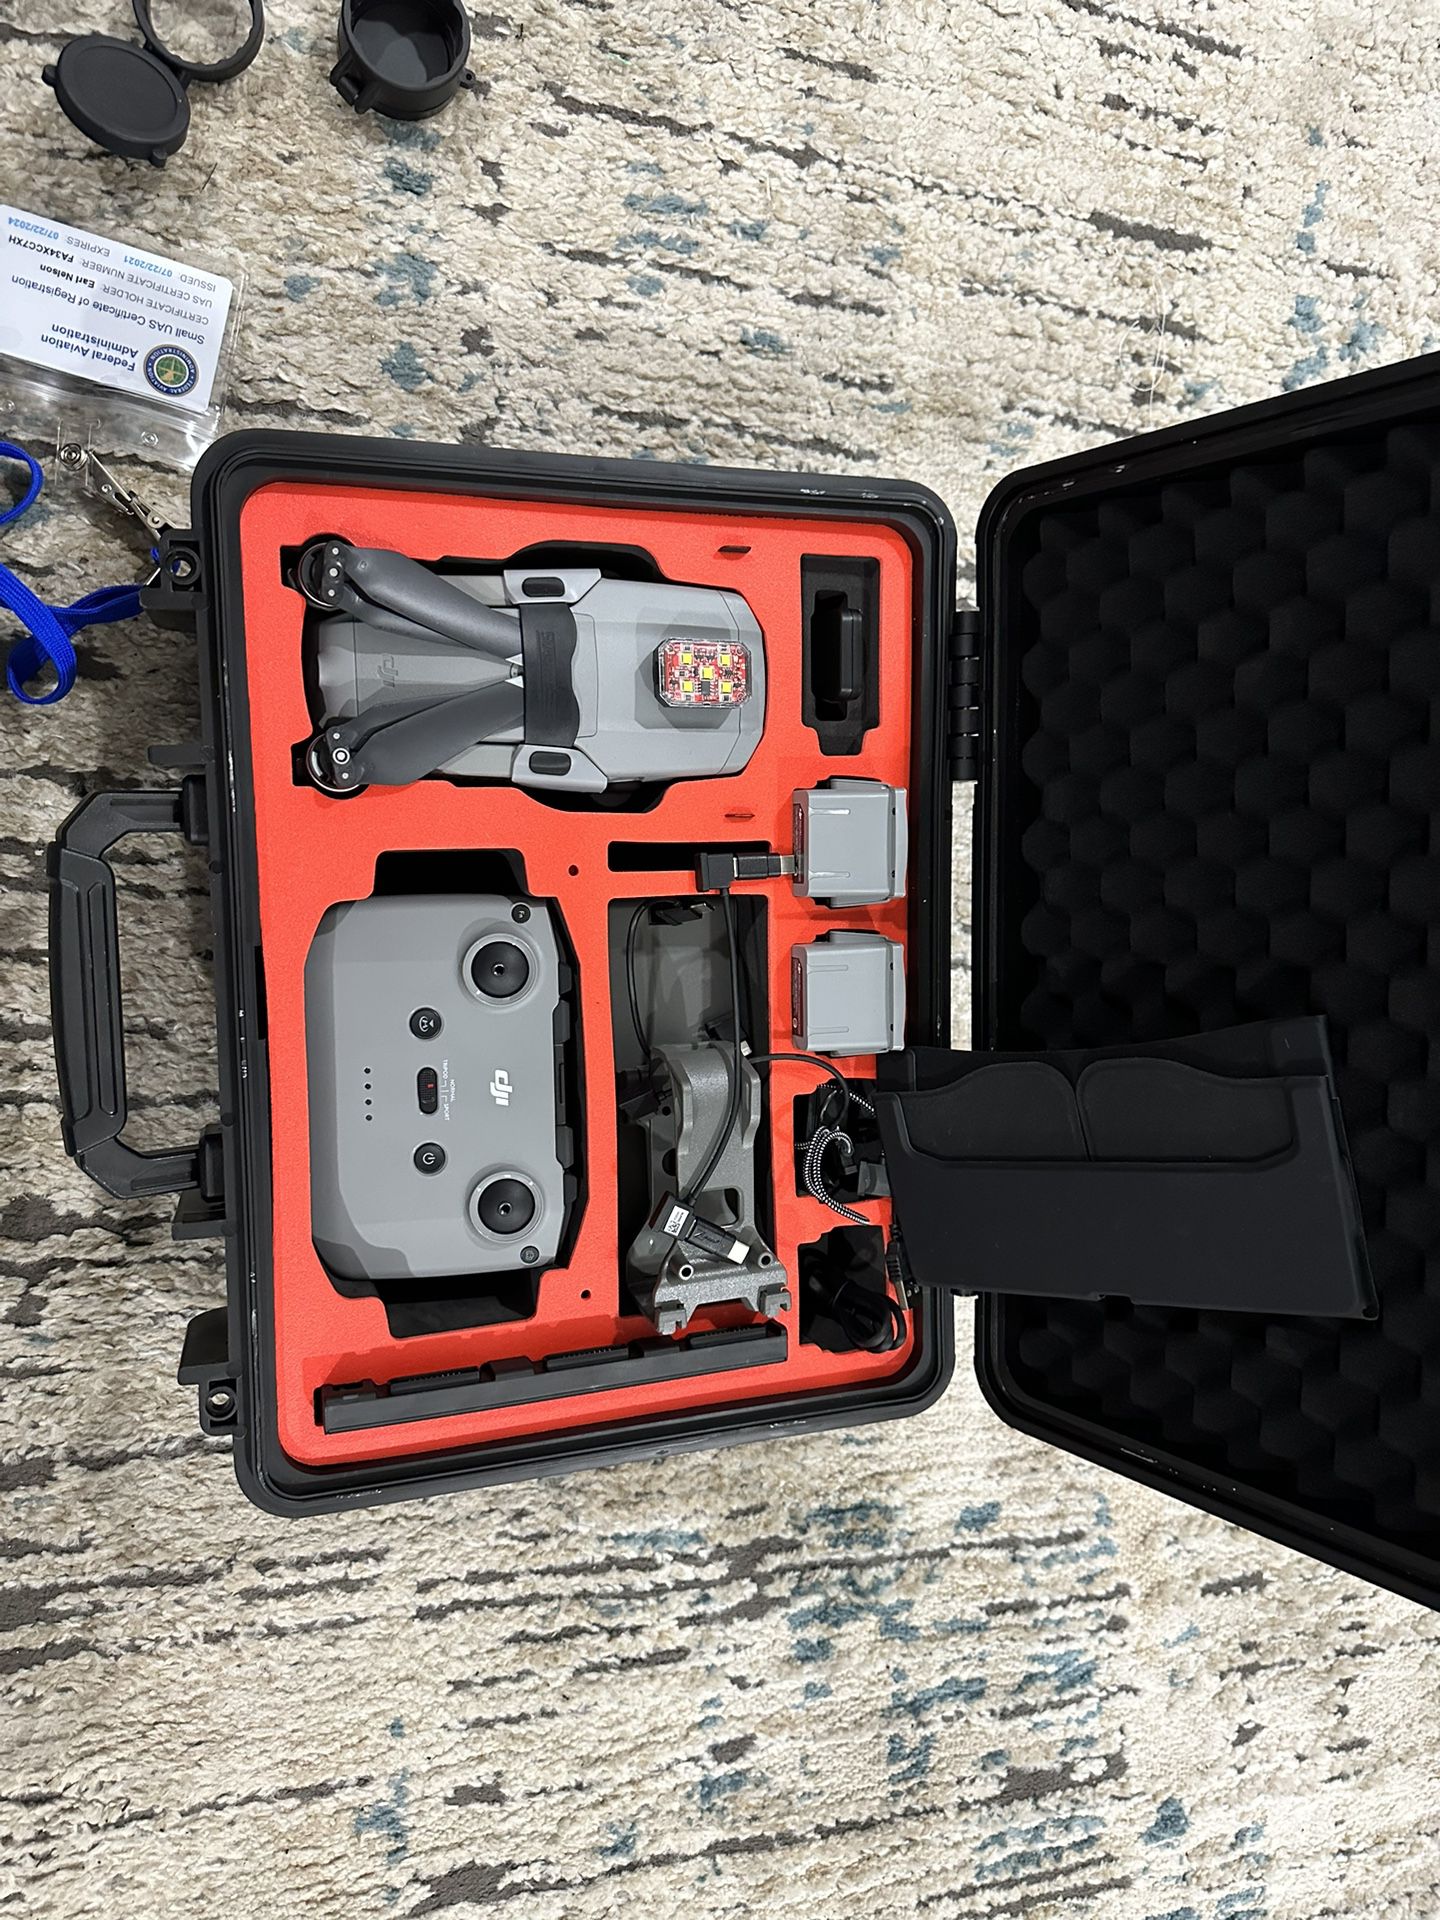 DJI MAVIC AIR 2 FLY MORE COMBO. THIS ITEM COMES WITH ALL ITEMS IN THE PICTURES.